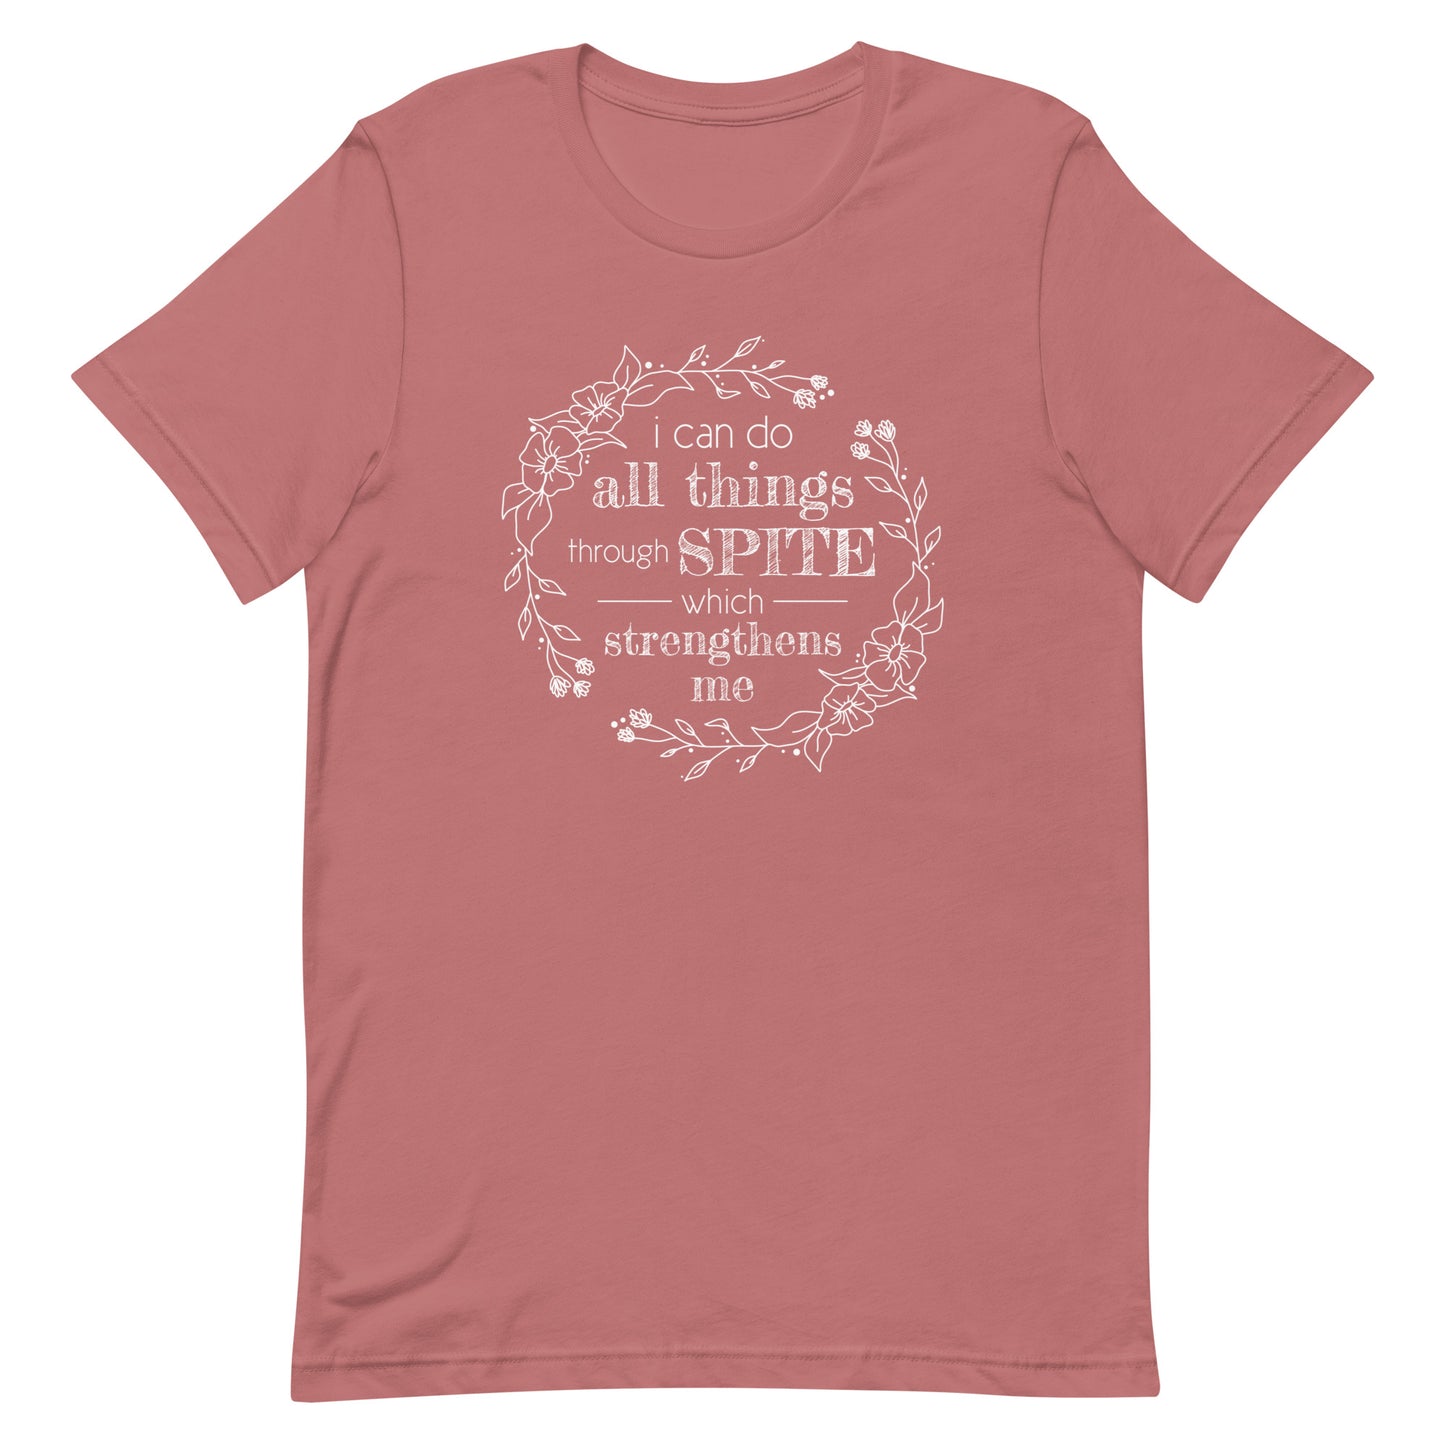 A dusky pink crewneck t-shirt with an illustration of a wreath of flowers. Inside the wreath is text that reads "I can do all things through spite which strengthens me"